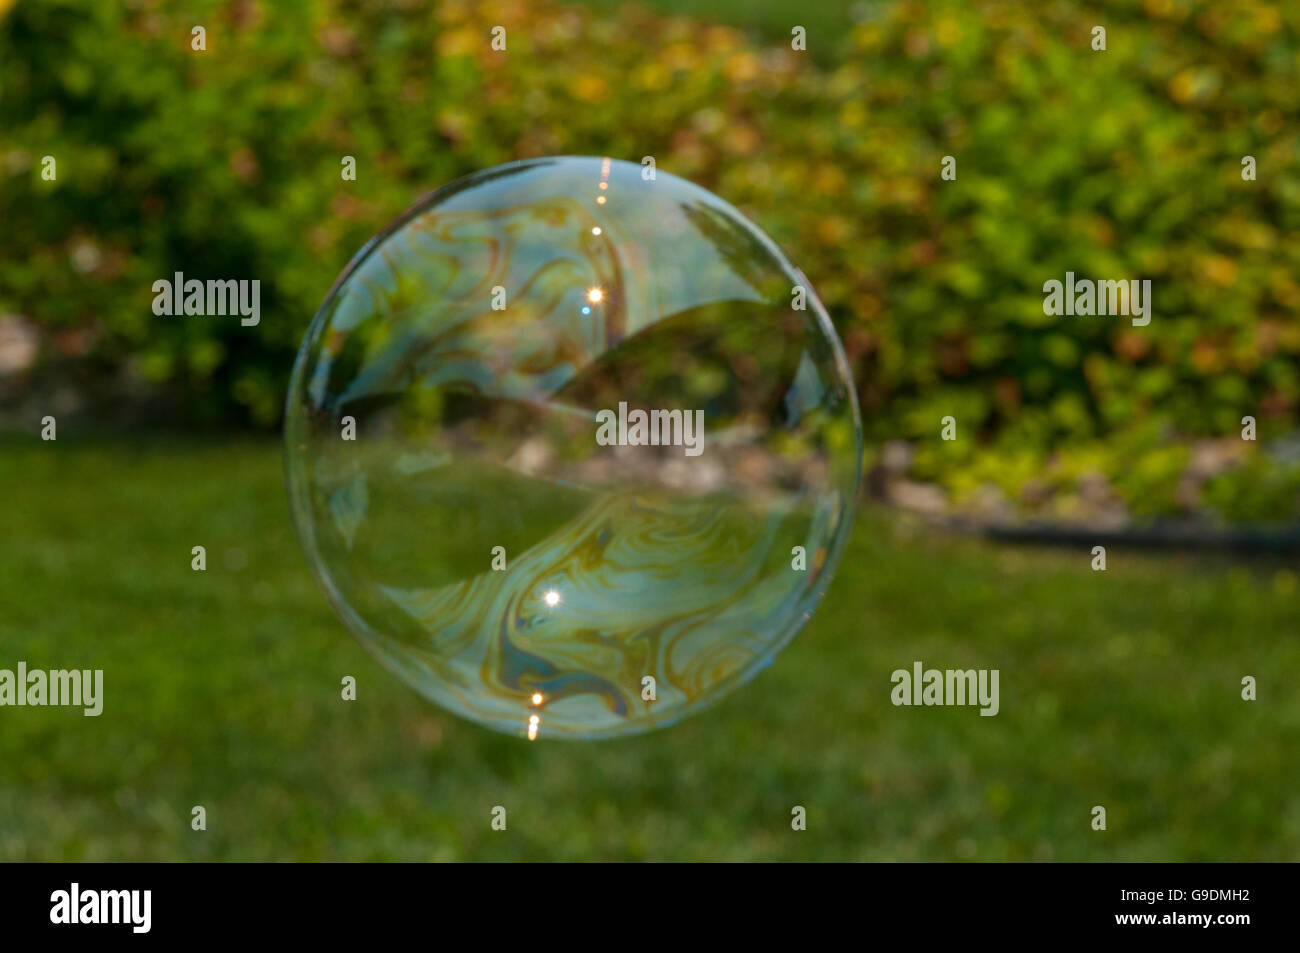 A soap bubble floats through the air in front of grass and trees